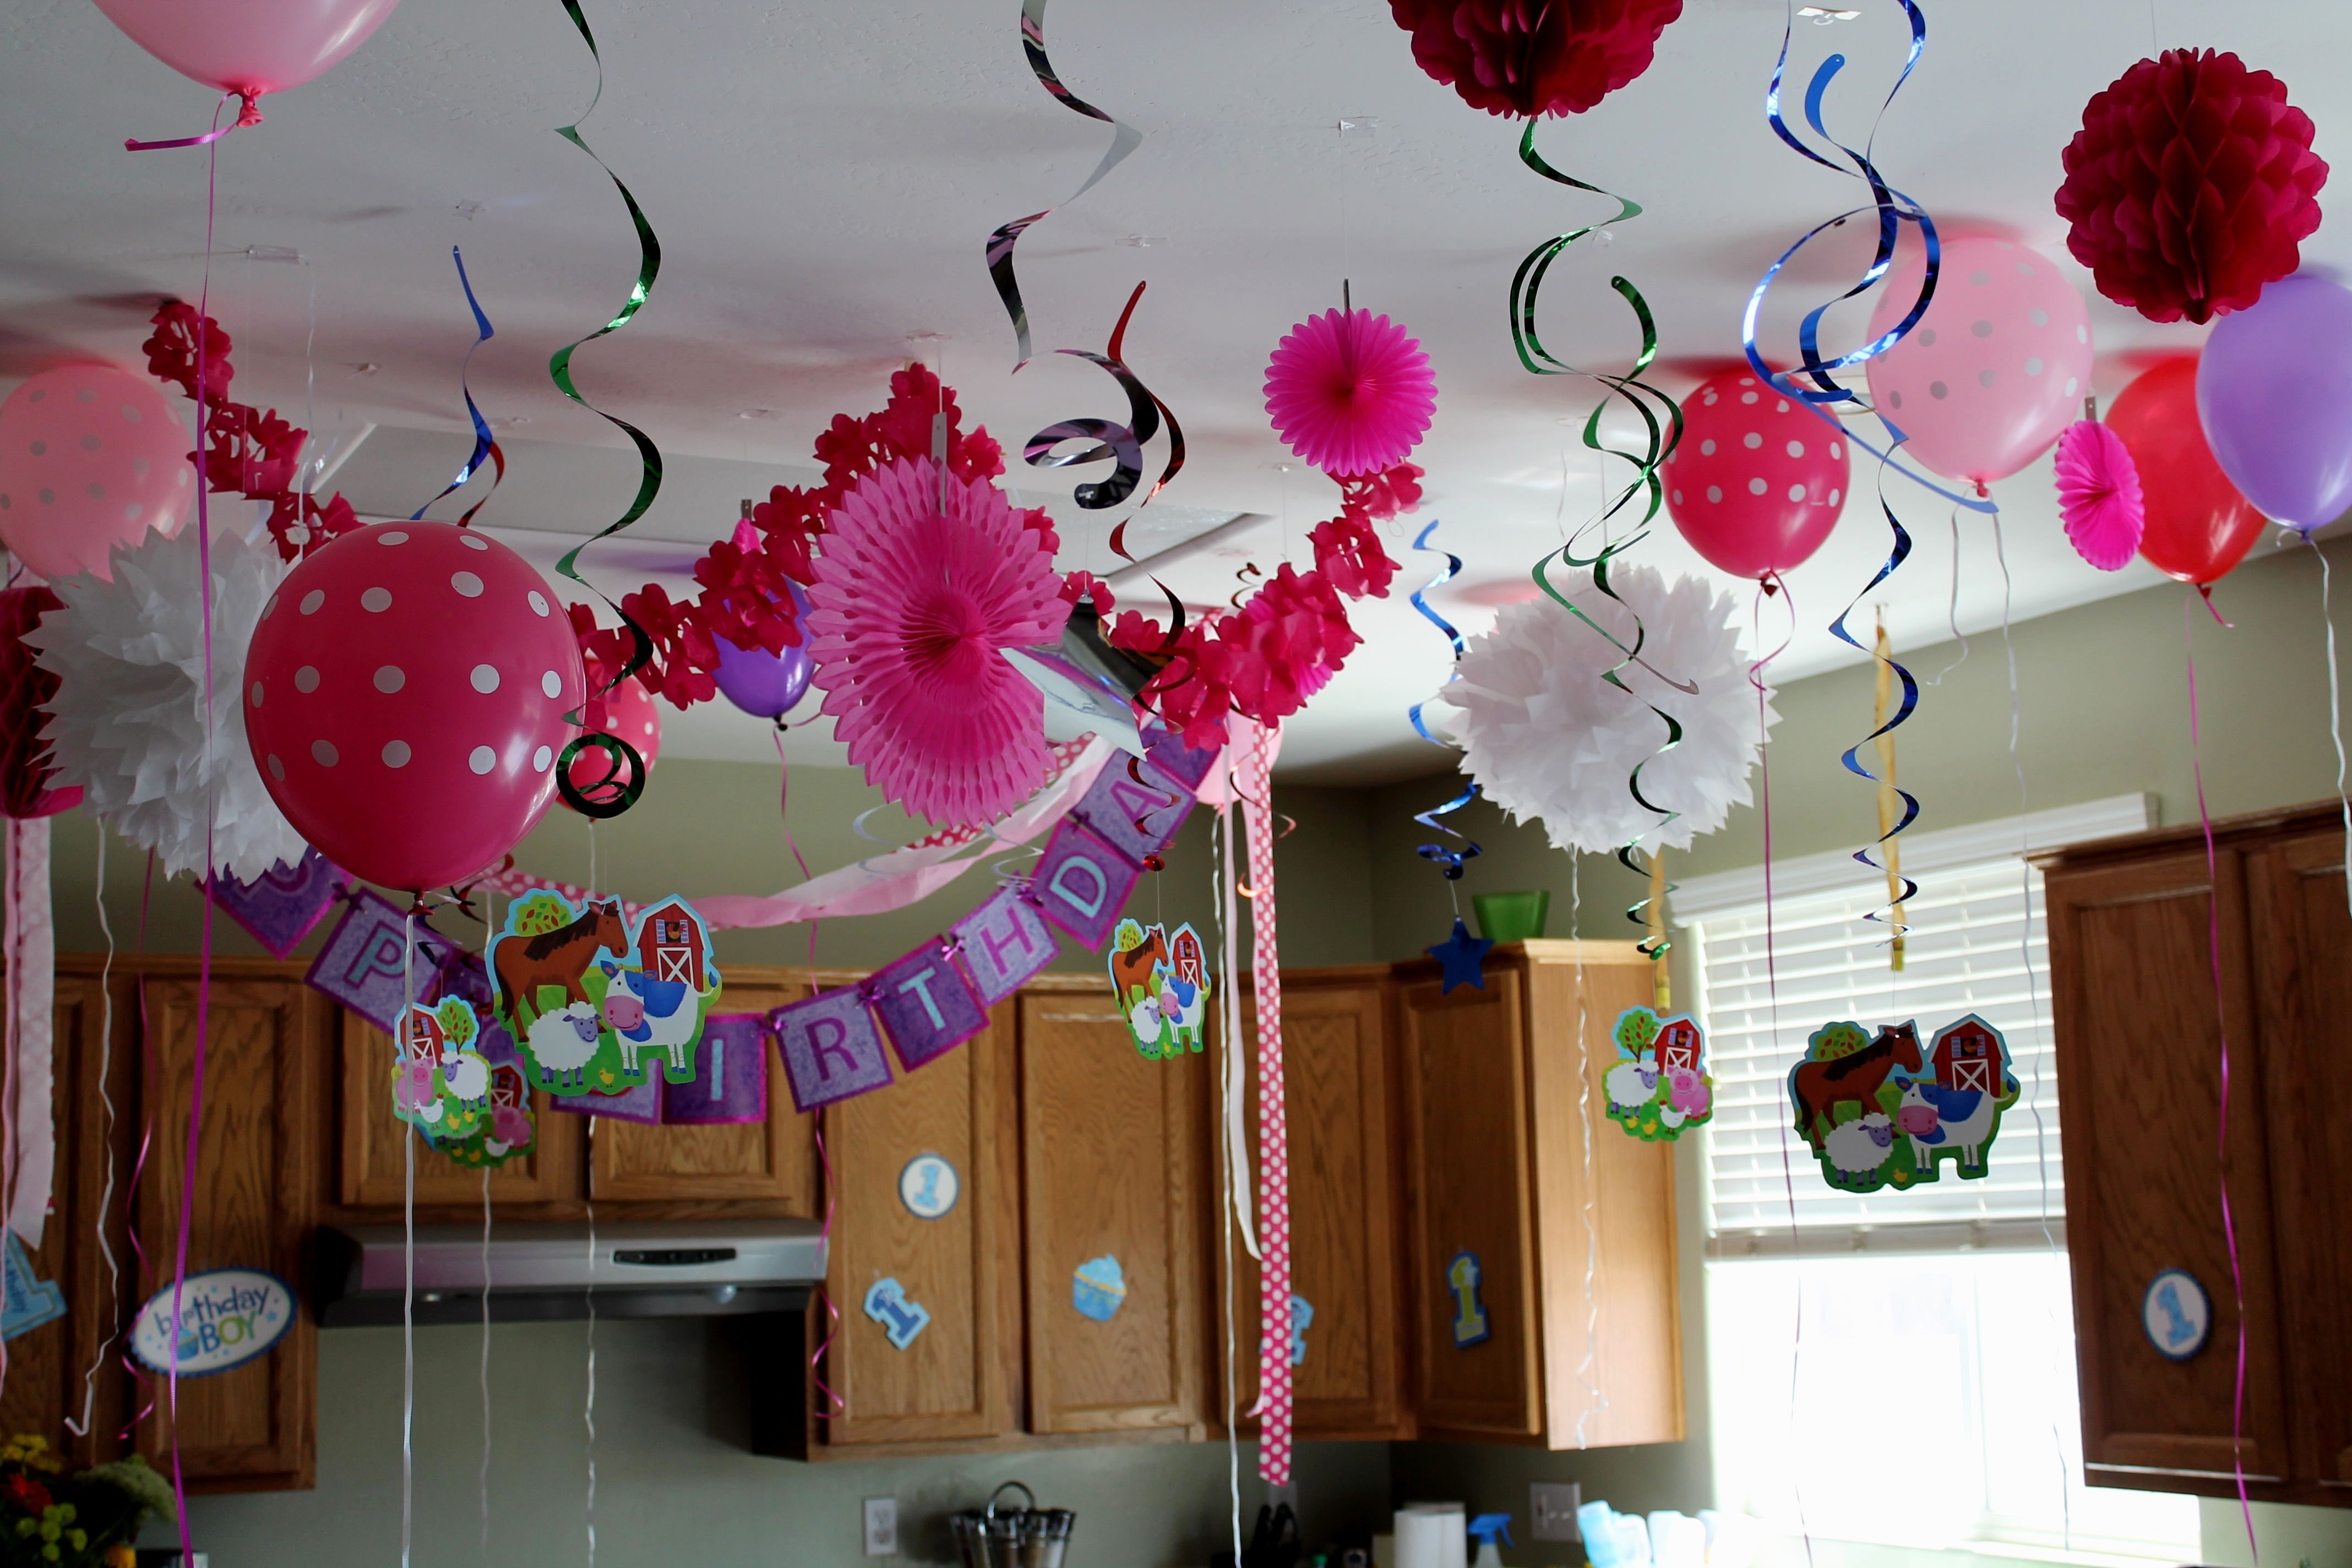 10 Cute Ideas For Birthday Parties At Home pretentious birthday party at home ideas decor awesome decoration 2 2022